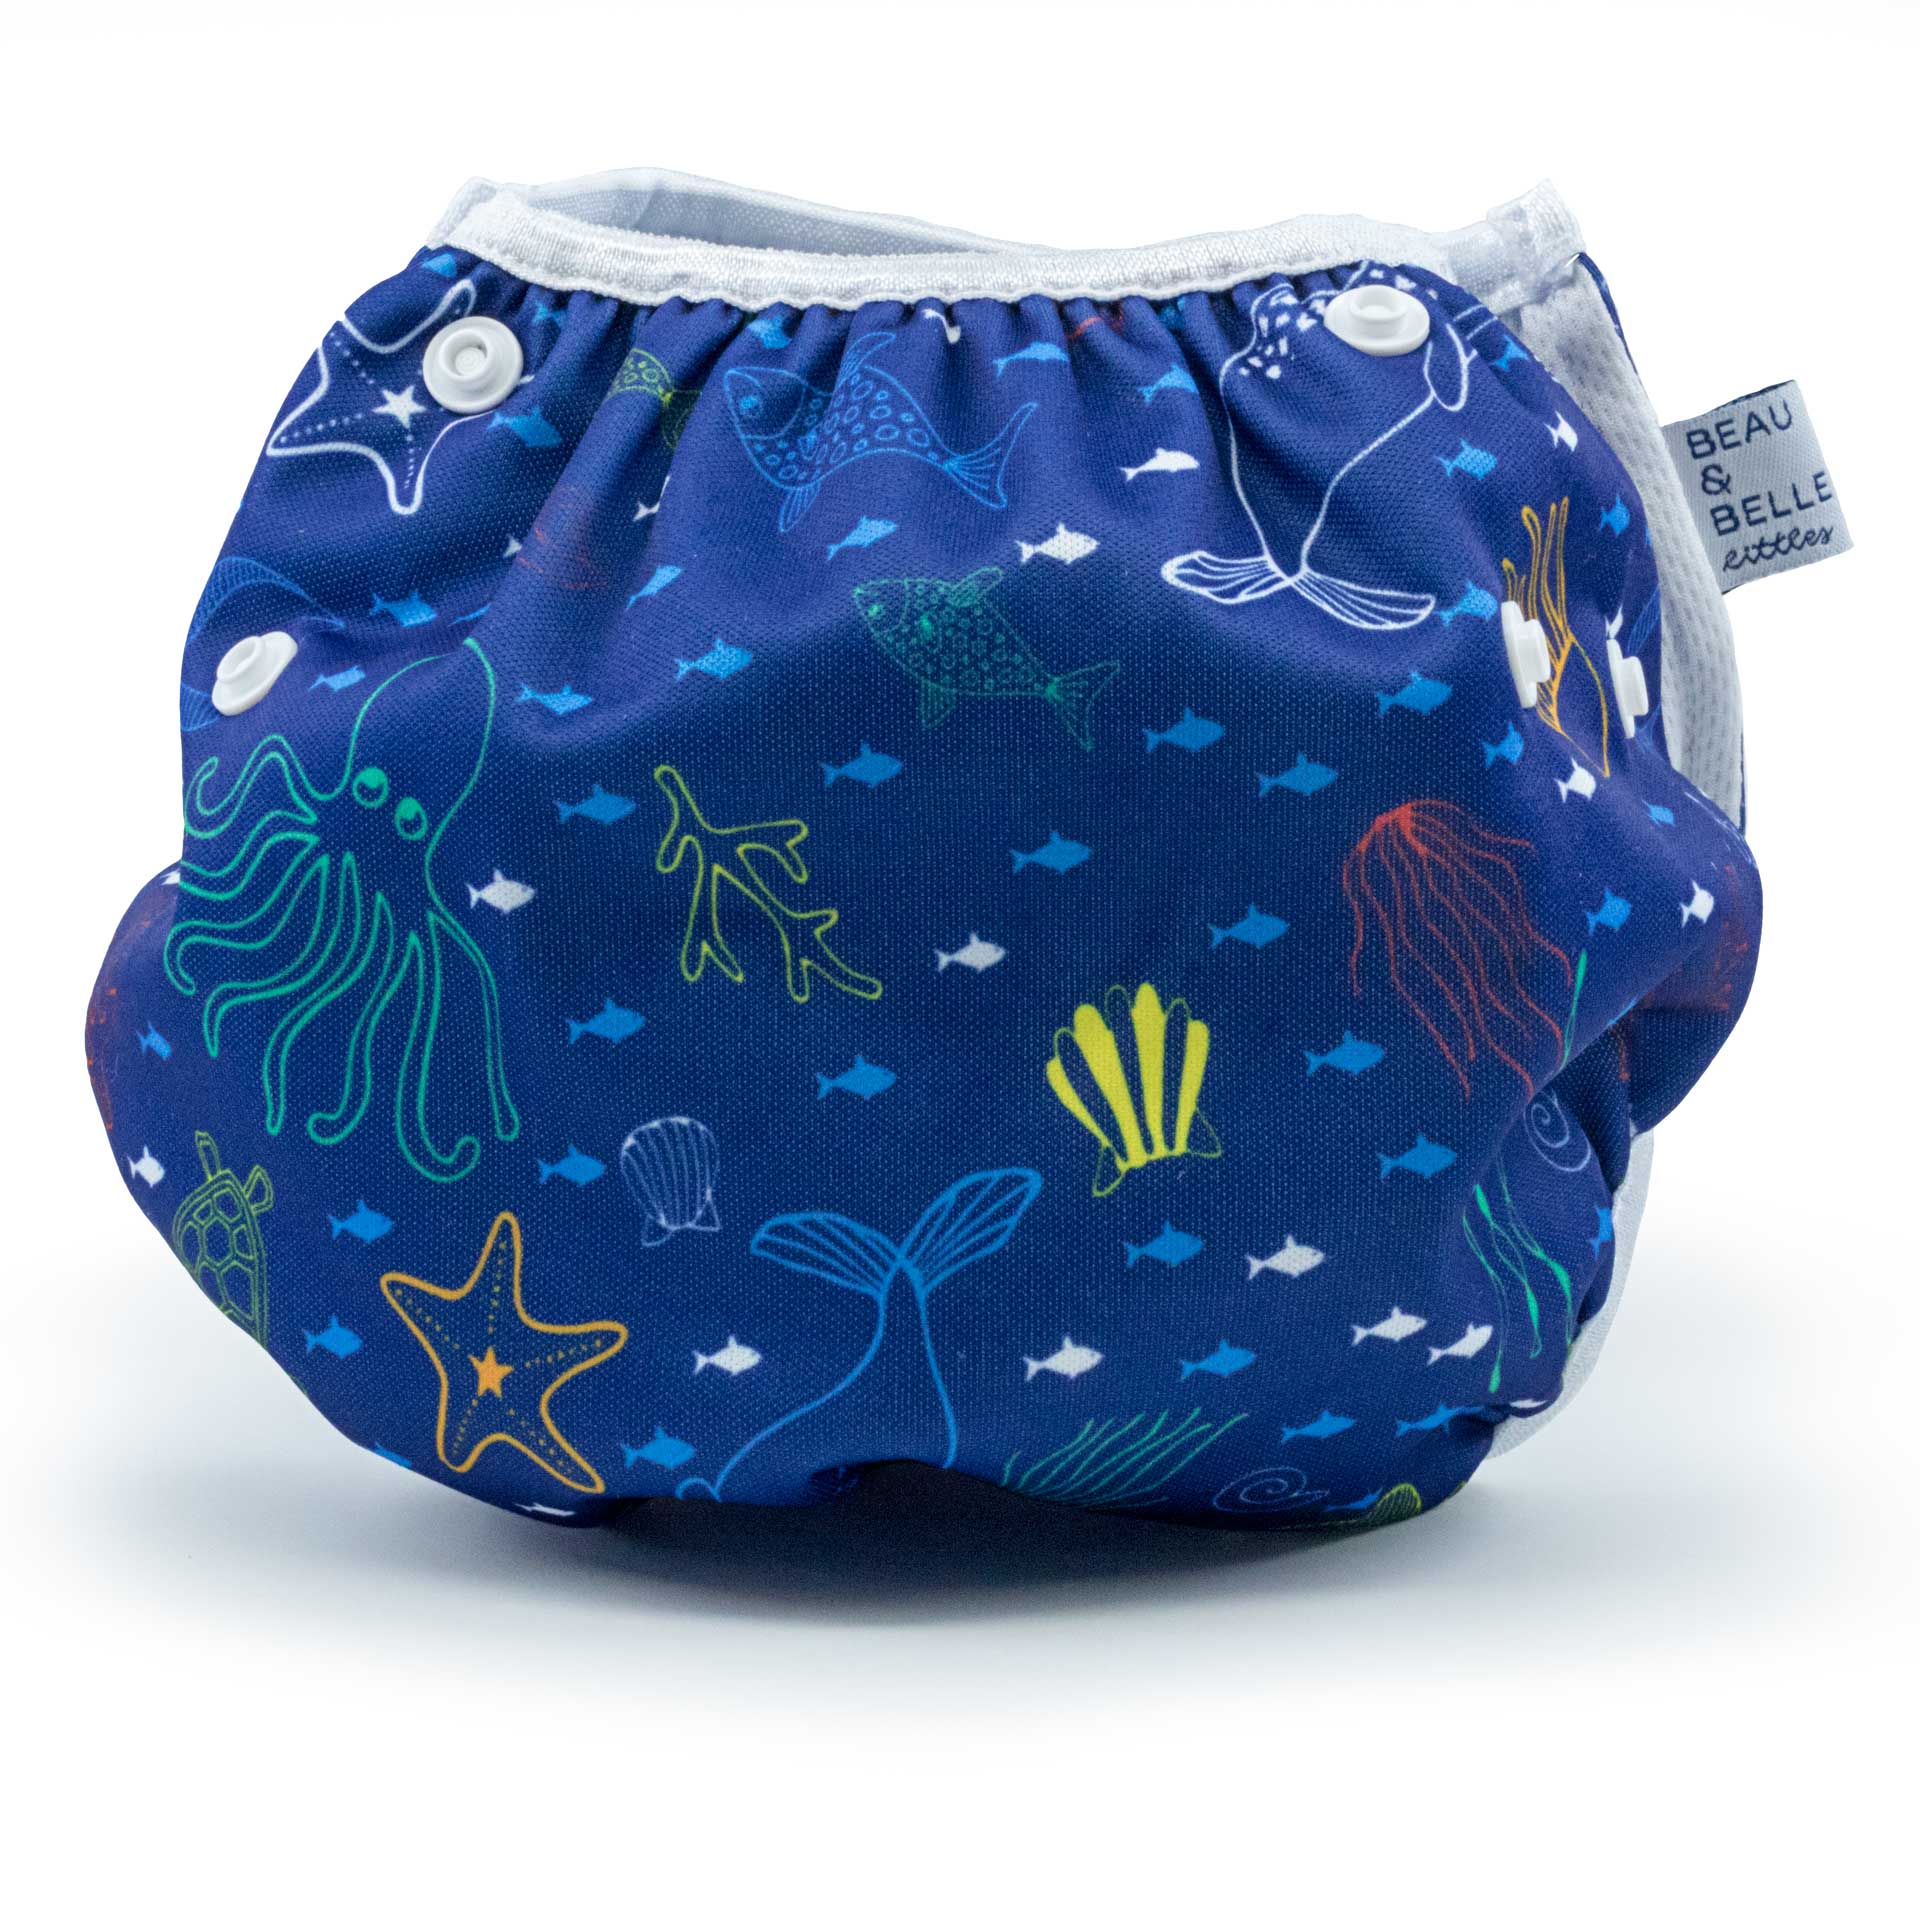 Beau and Belle Littles Swim Diaper, Regular Size, dark blue with outlines of sea creatures, Sea Friends print, back view